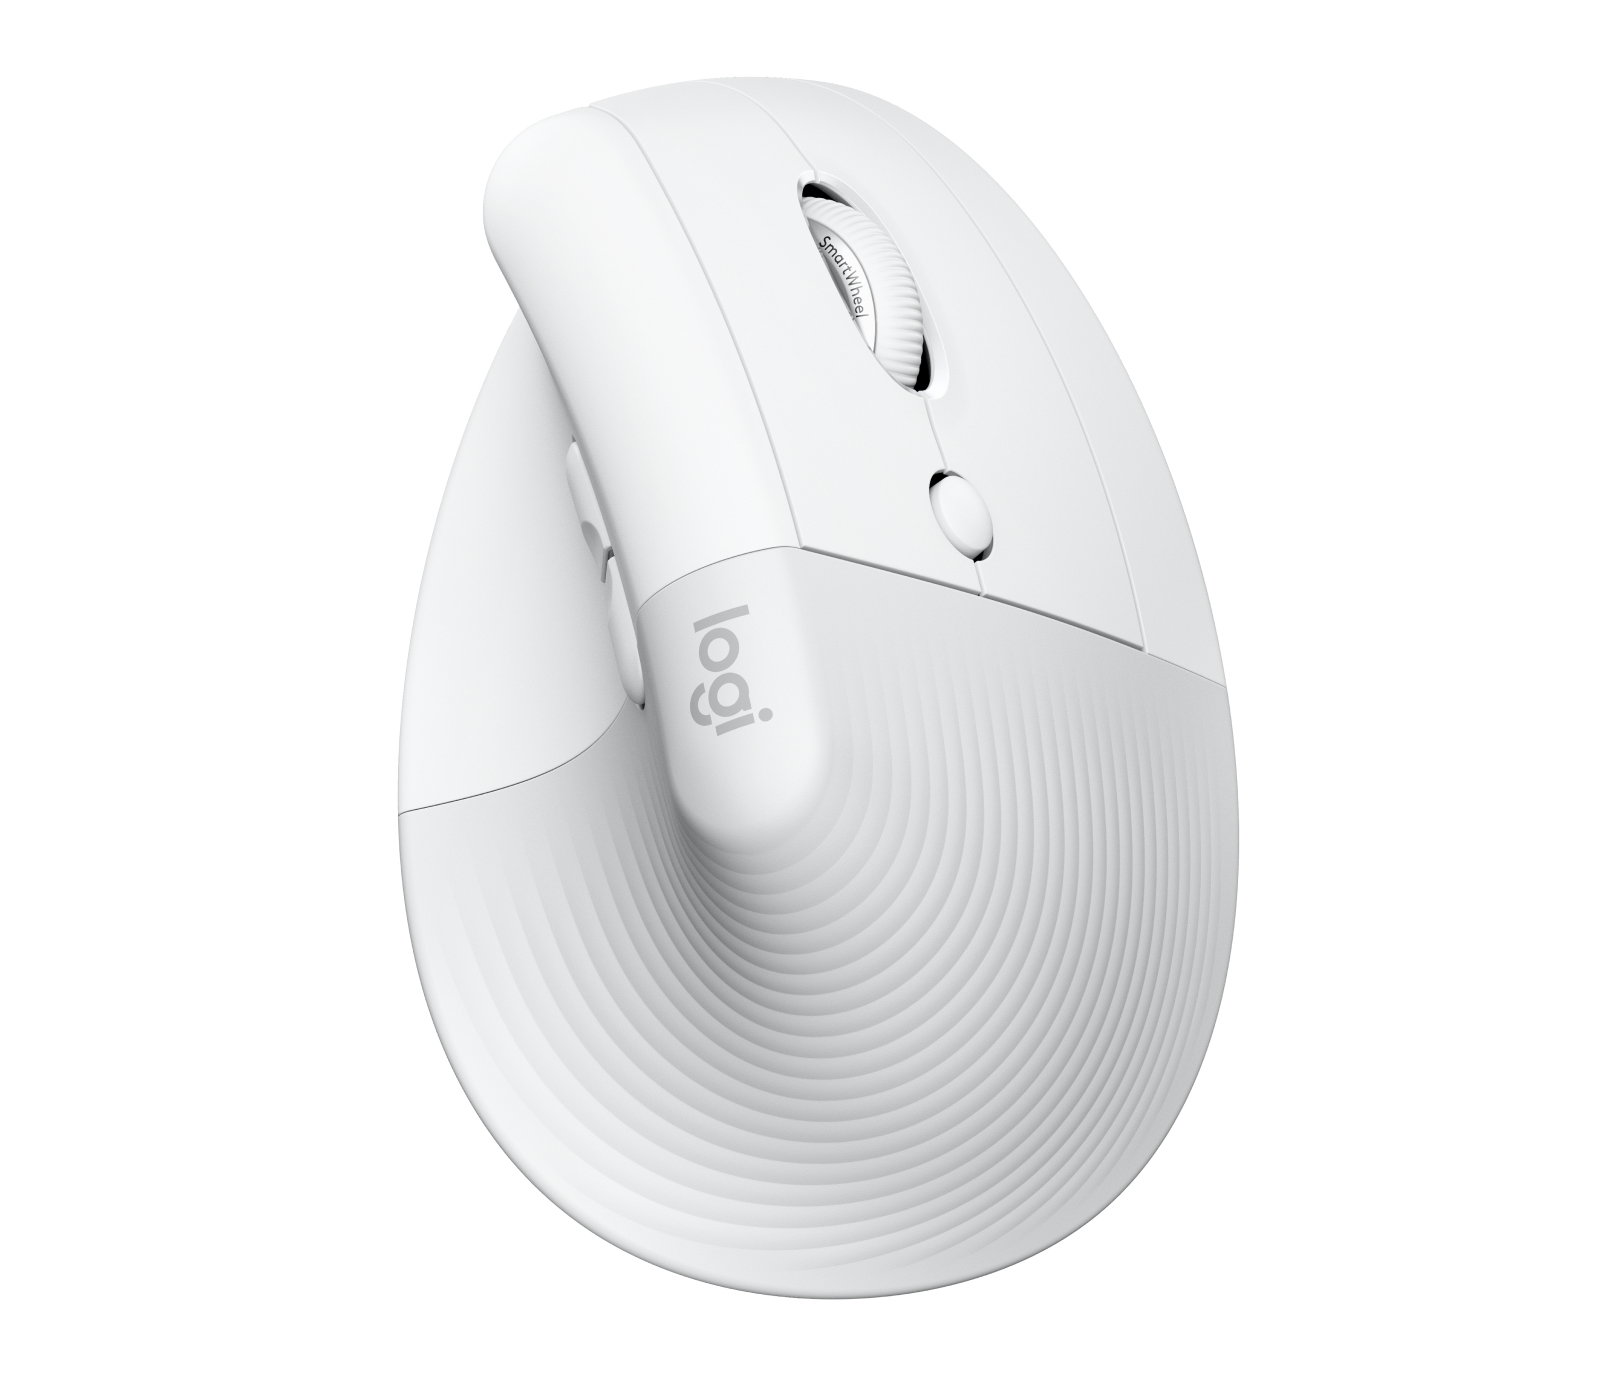 Logitech Lift for Business mouse Right-hand RF Wireless + Bluetooth Optical 4000 DPI - 910-006496